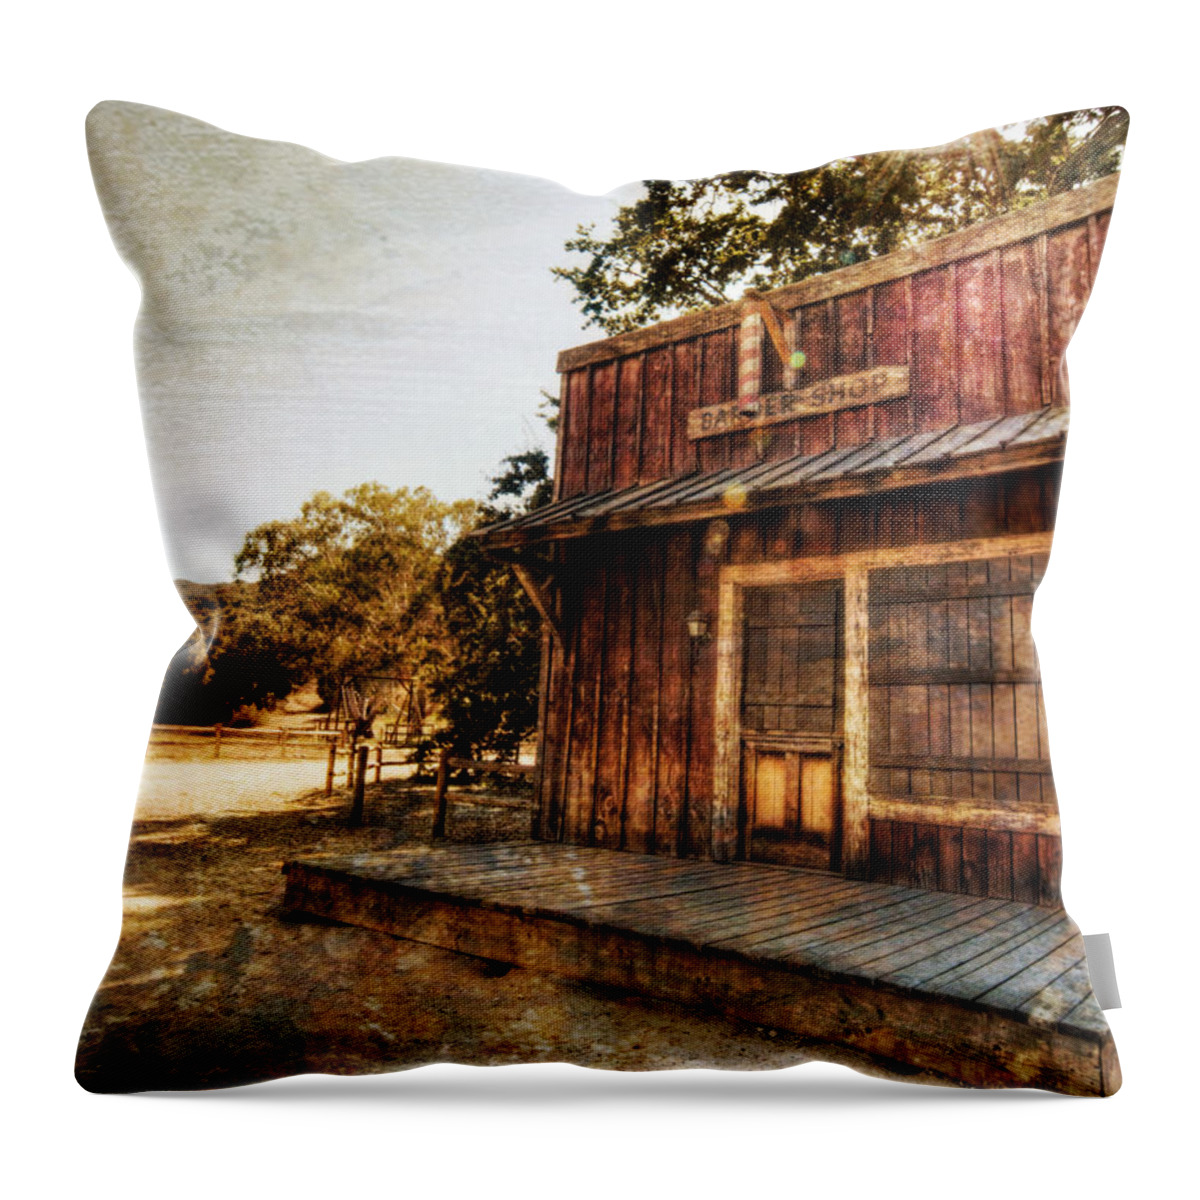 Western Throw Pillow featuring the photograph Western Barber Shop by Natasha Bishop